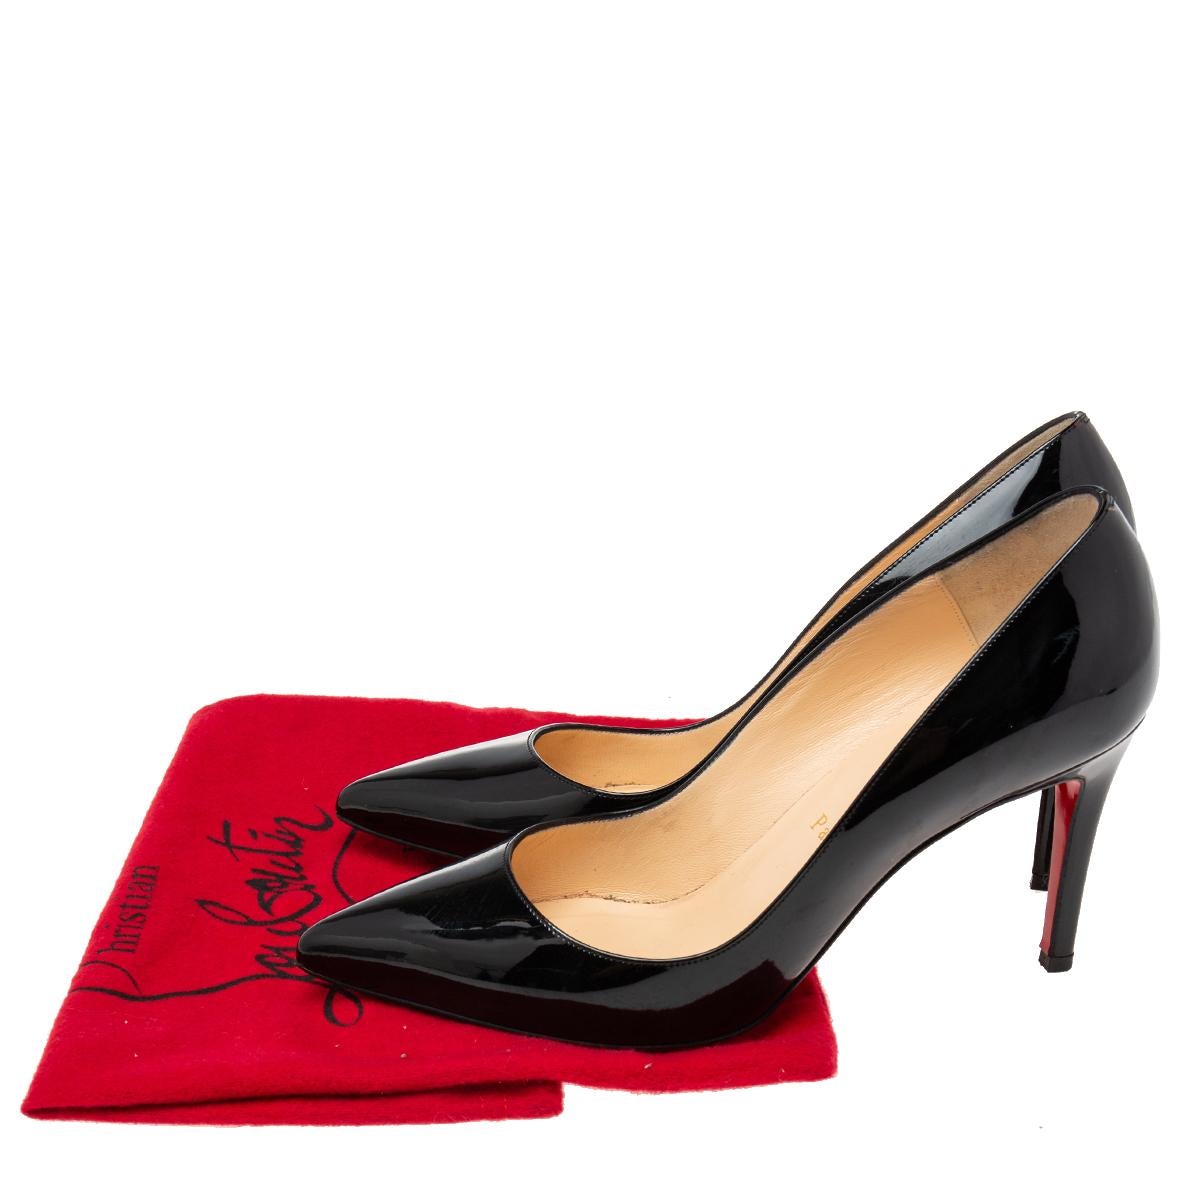 Christian Louboutin Black Patent Leather So Kate Pointed Toe Pumps Size 38.5 5